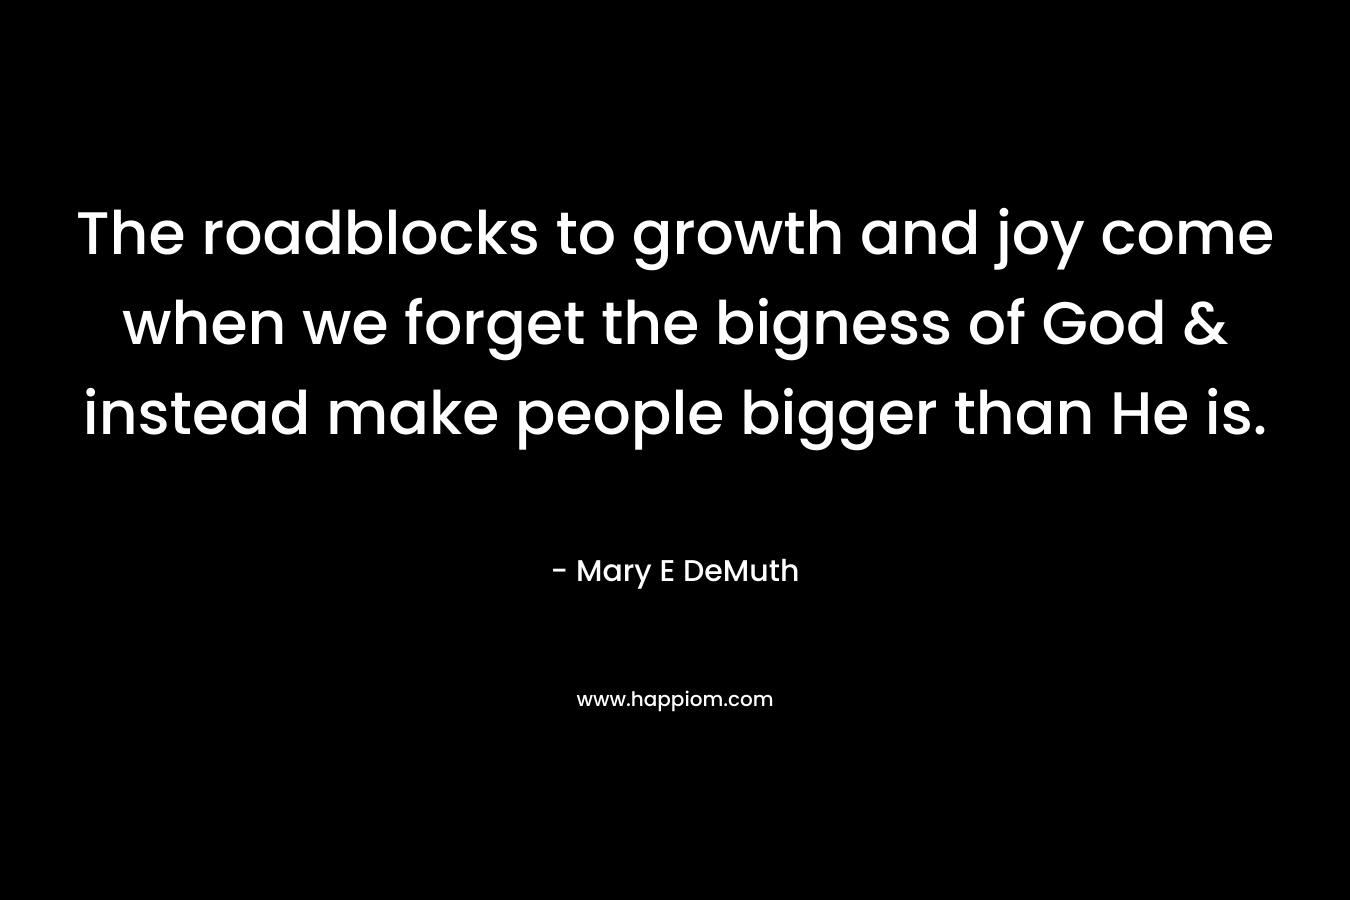 The roadblocks to growth and joy come when we forget the bigness of God & instead make people bigger than He is.